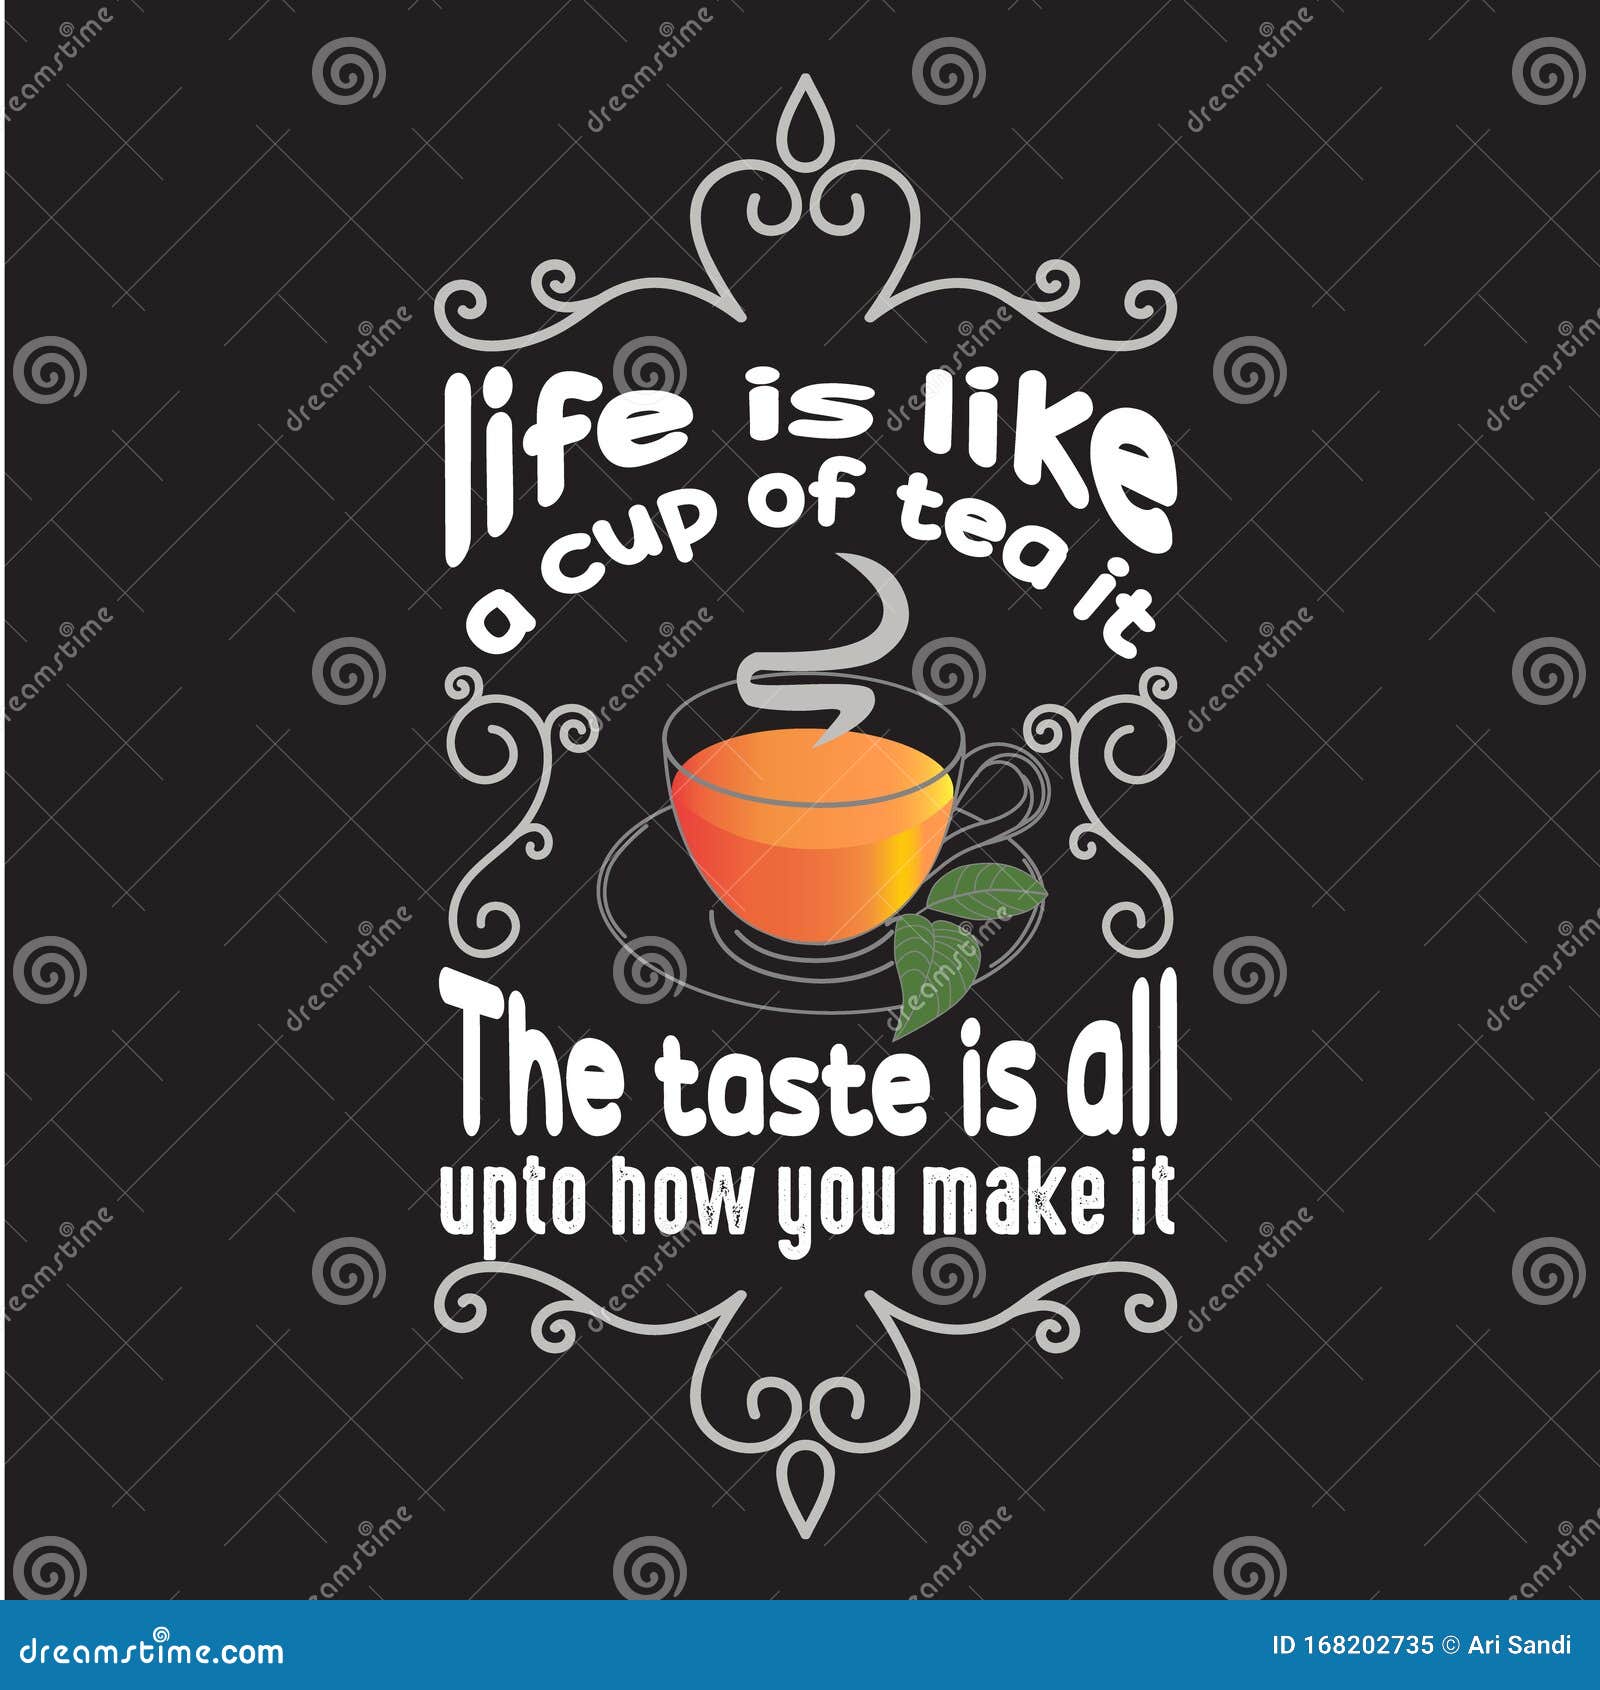 Inspiring Quote  poster print ITS HOW YOU MAKE IT LIFE IS LIKE A CUP OF TEA 